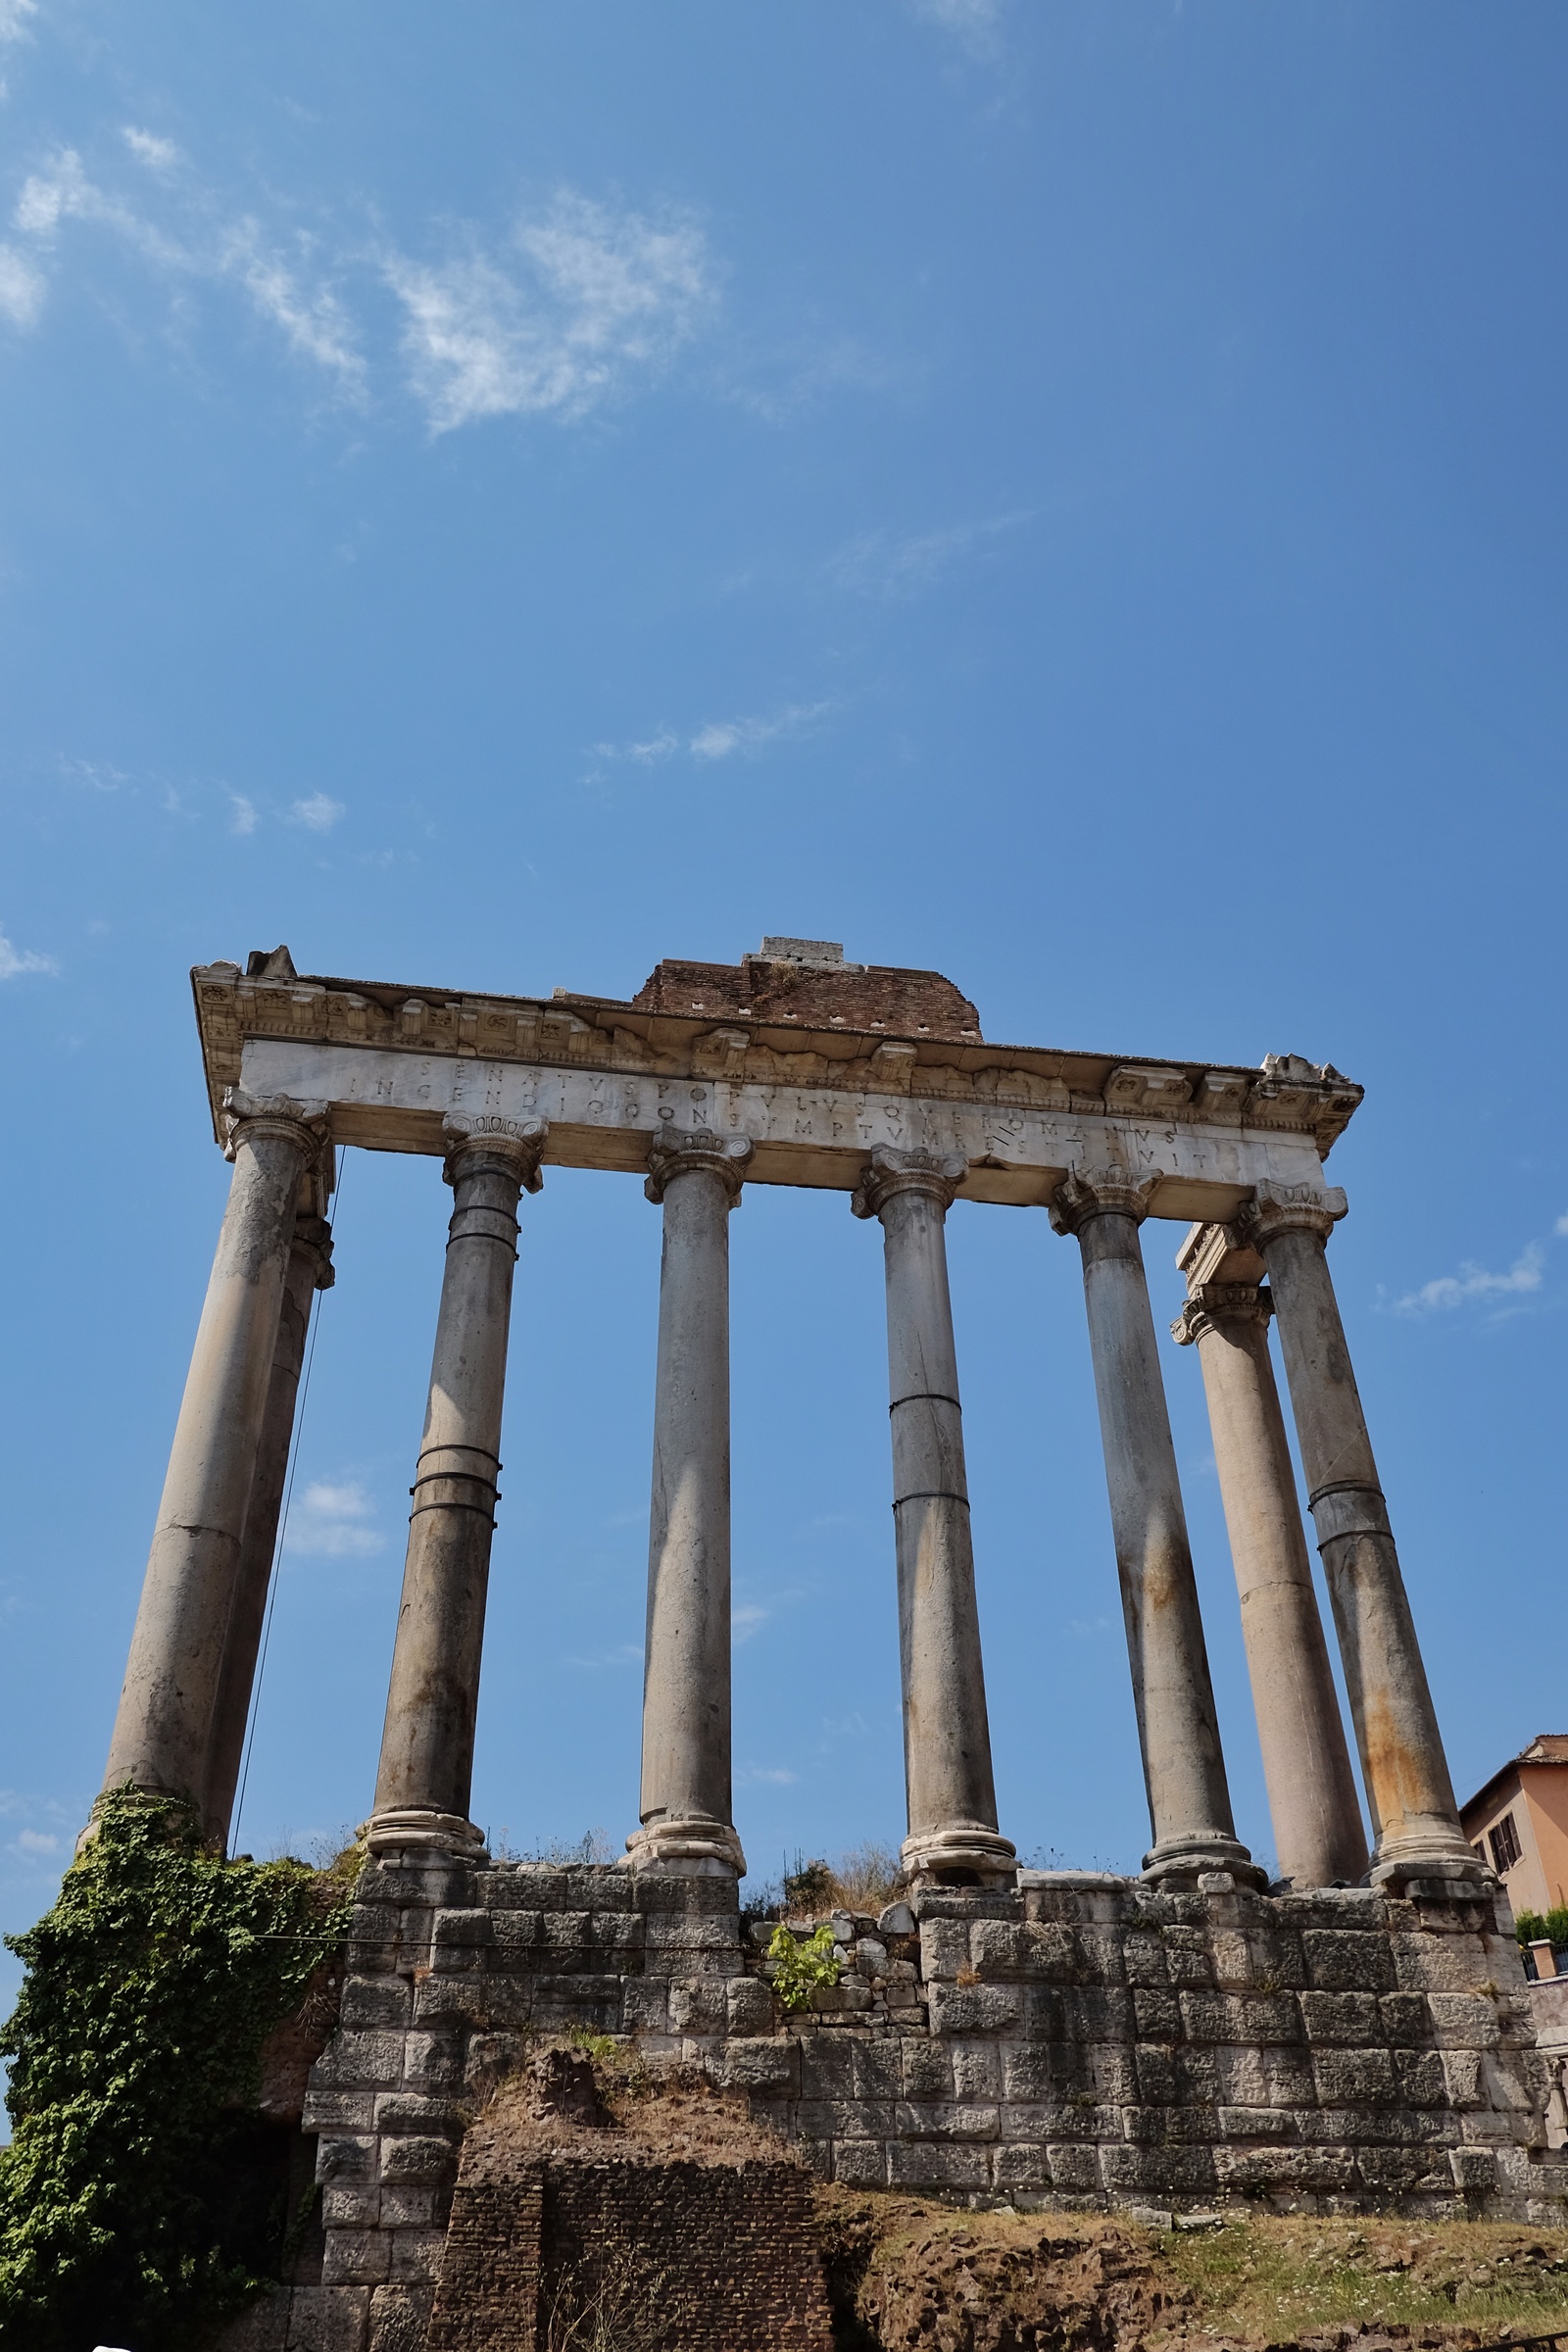 The Temple of Saturn in the Roman Forum.